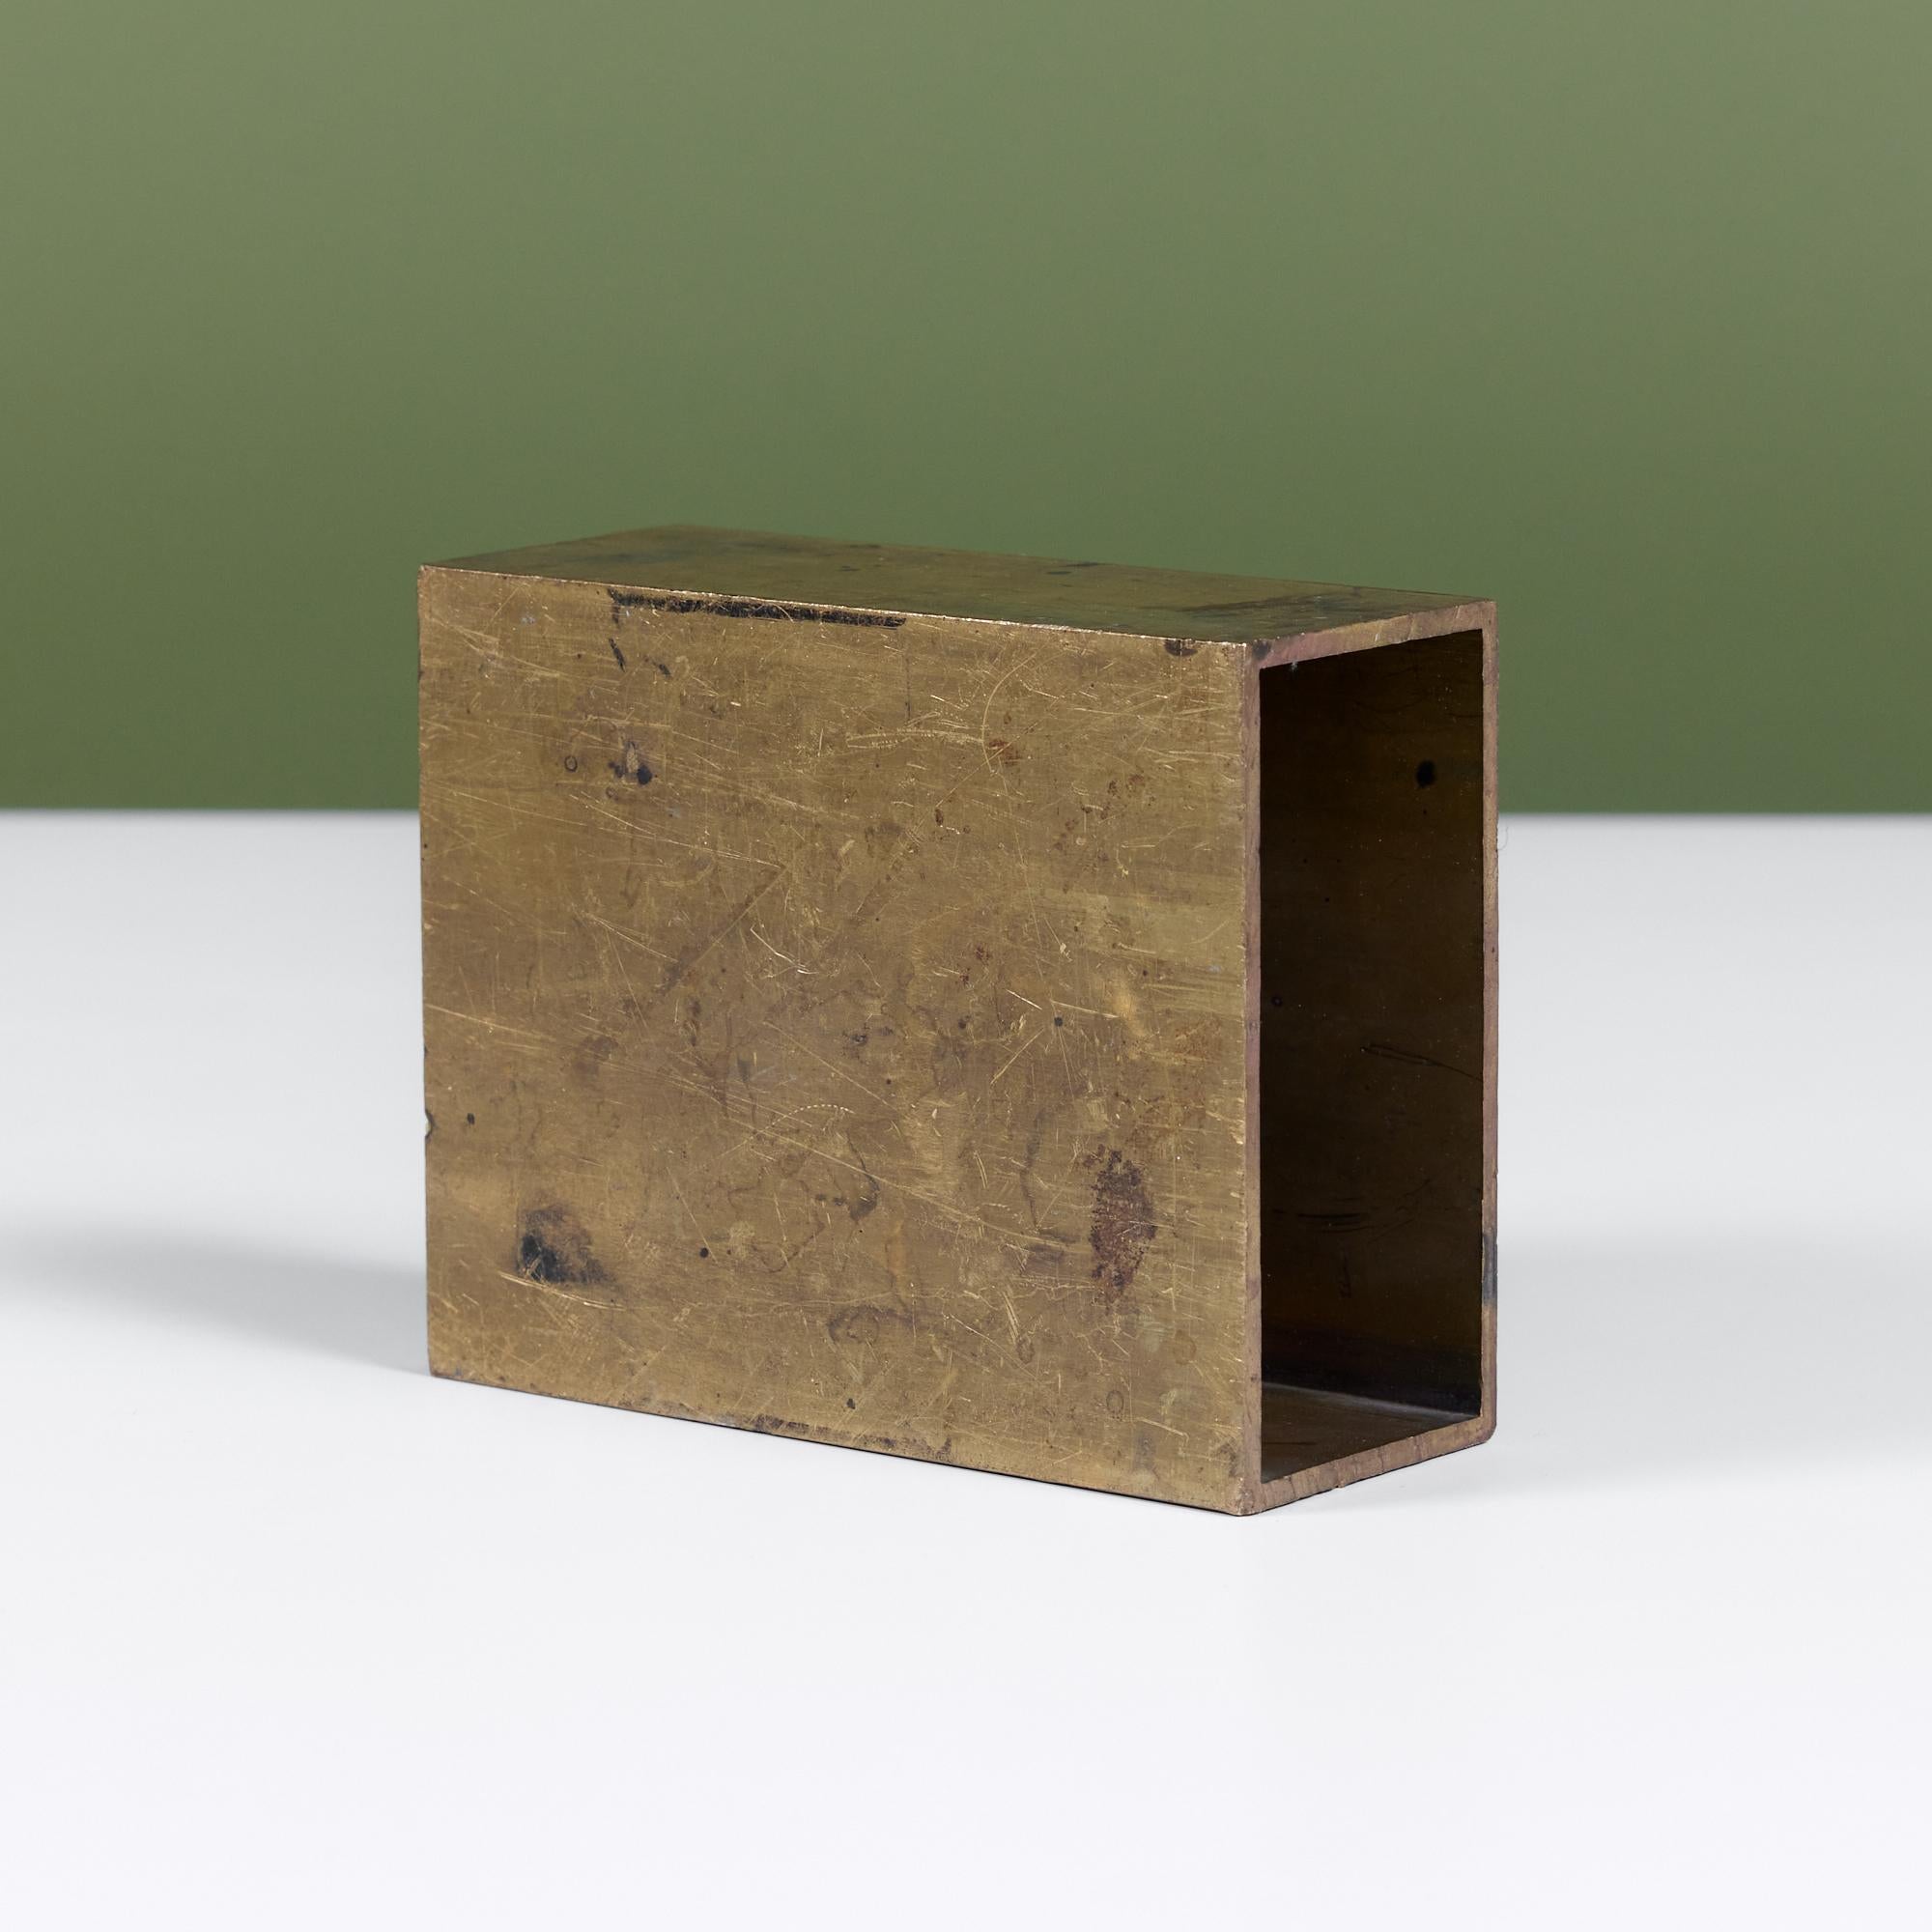 Industrial rectangular brass object. The brutalist form features a hollow center. The geometric block can be used as a bookend or decorative element.

Dimensions
﻿4